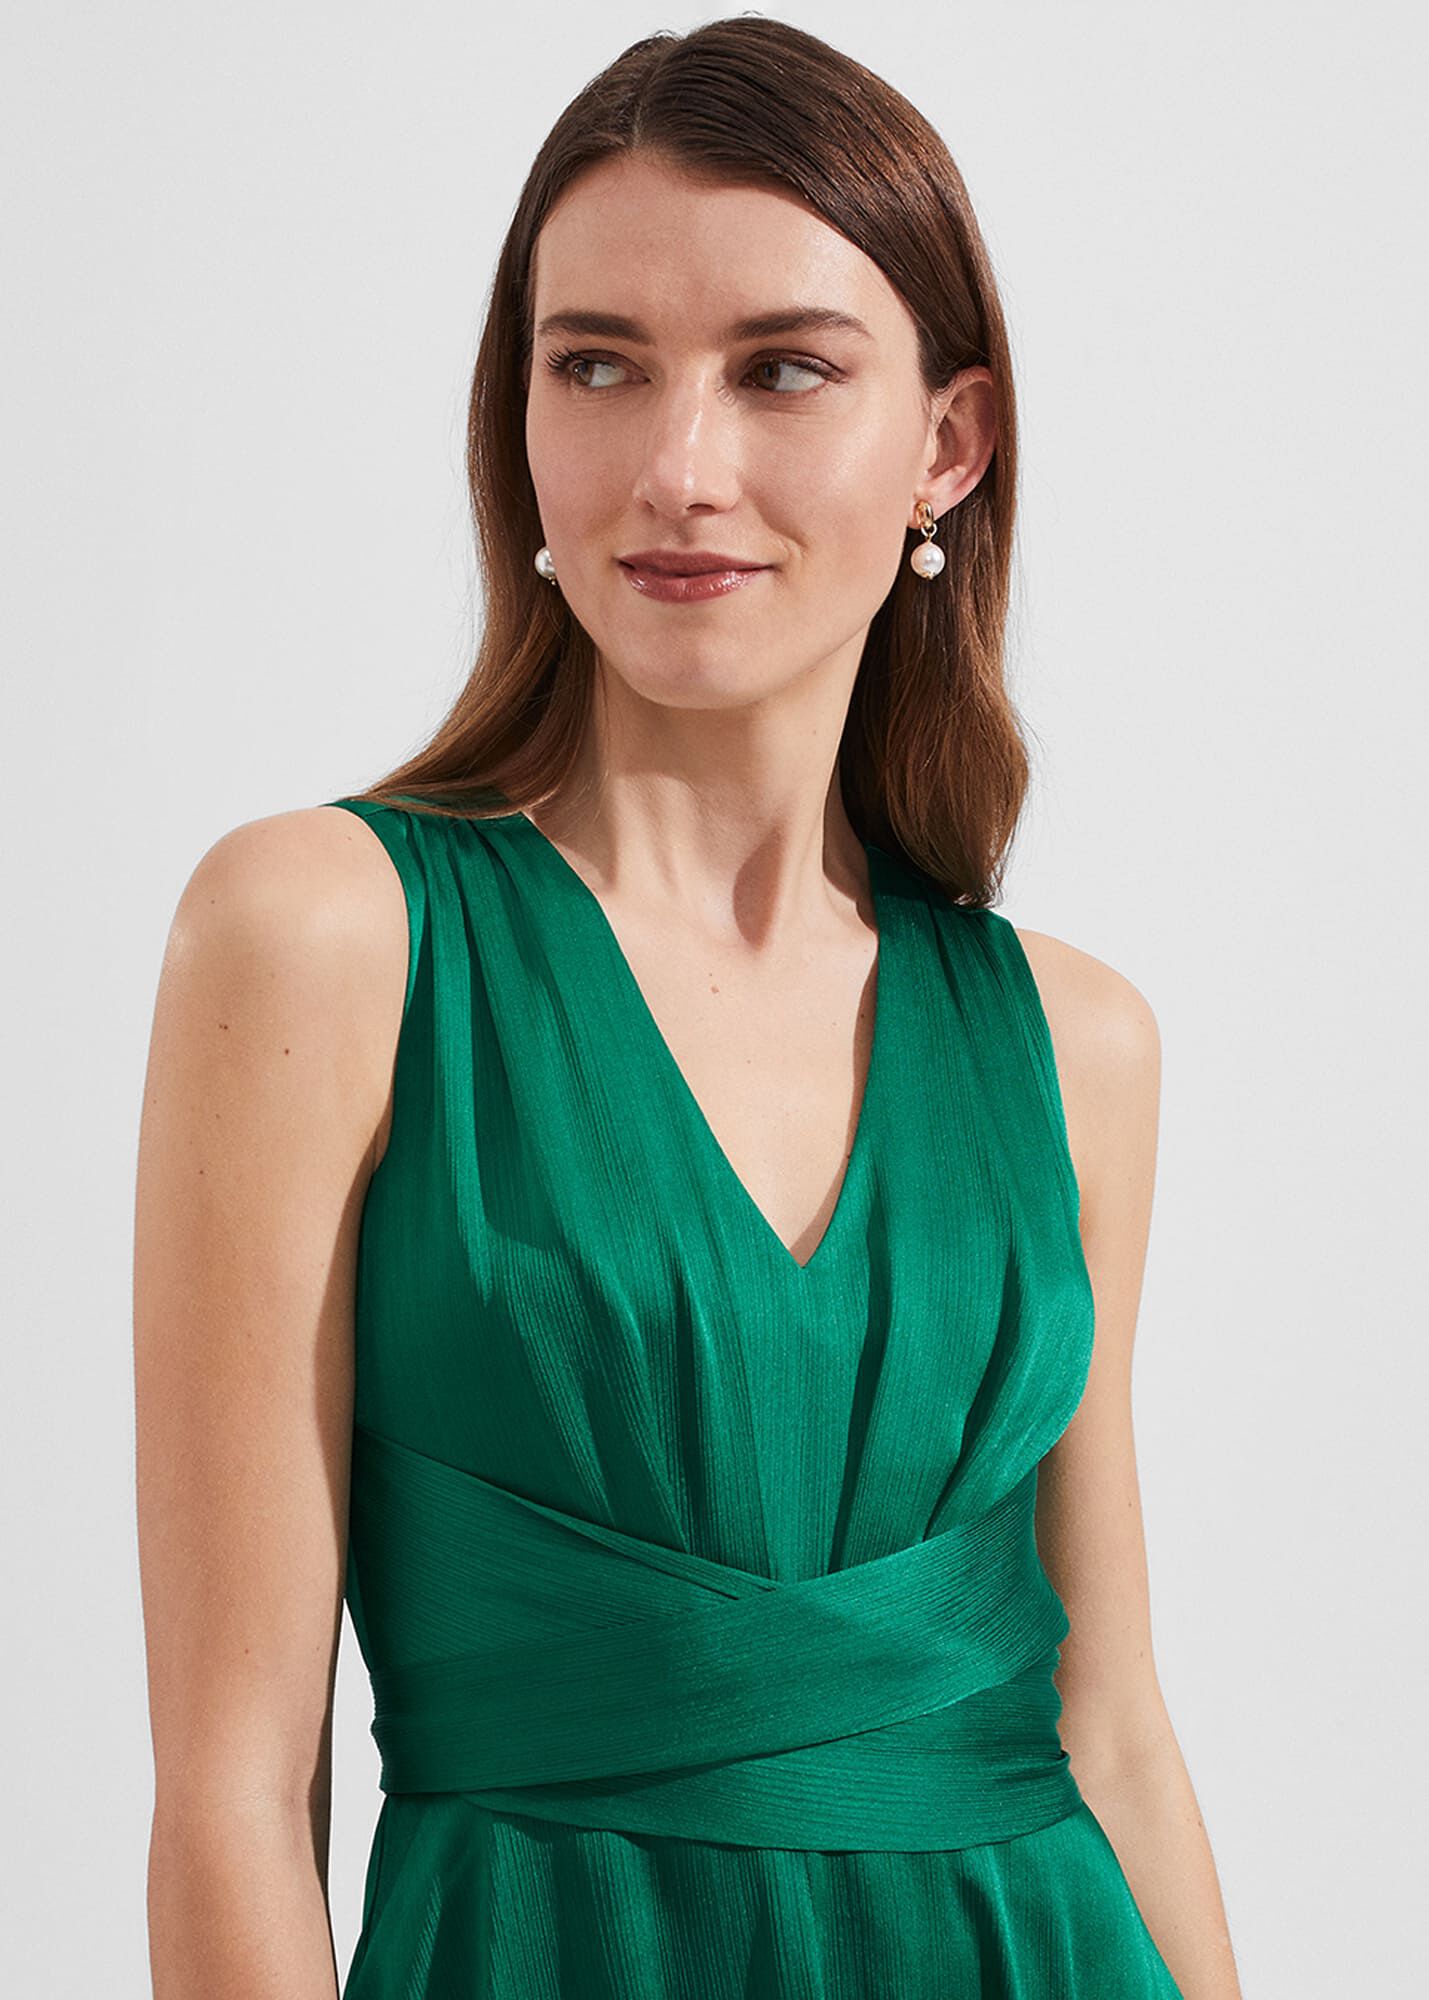 Viola Satin Fit And Flare Dress